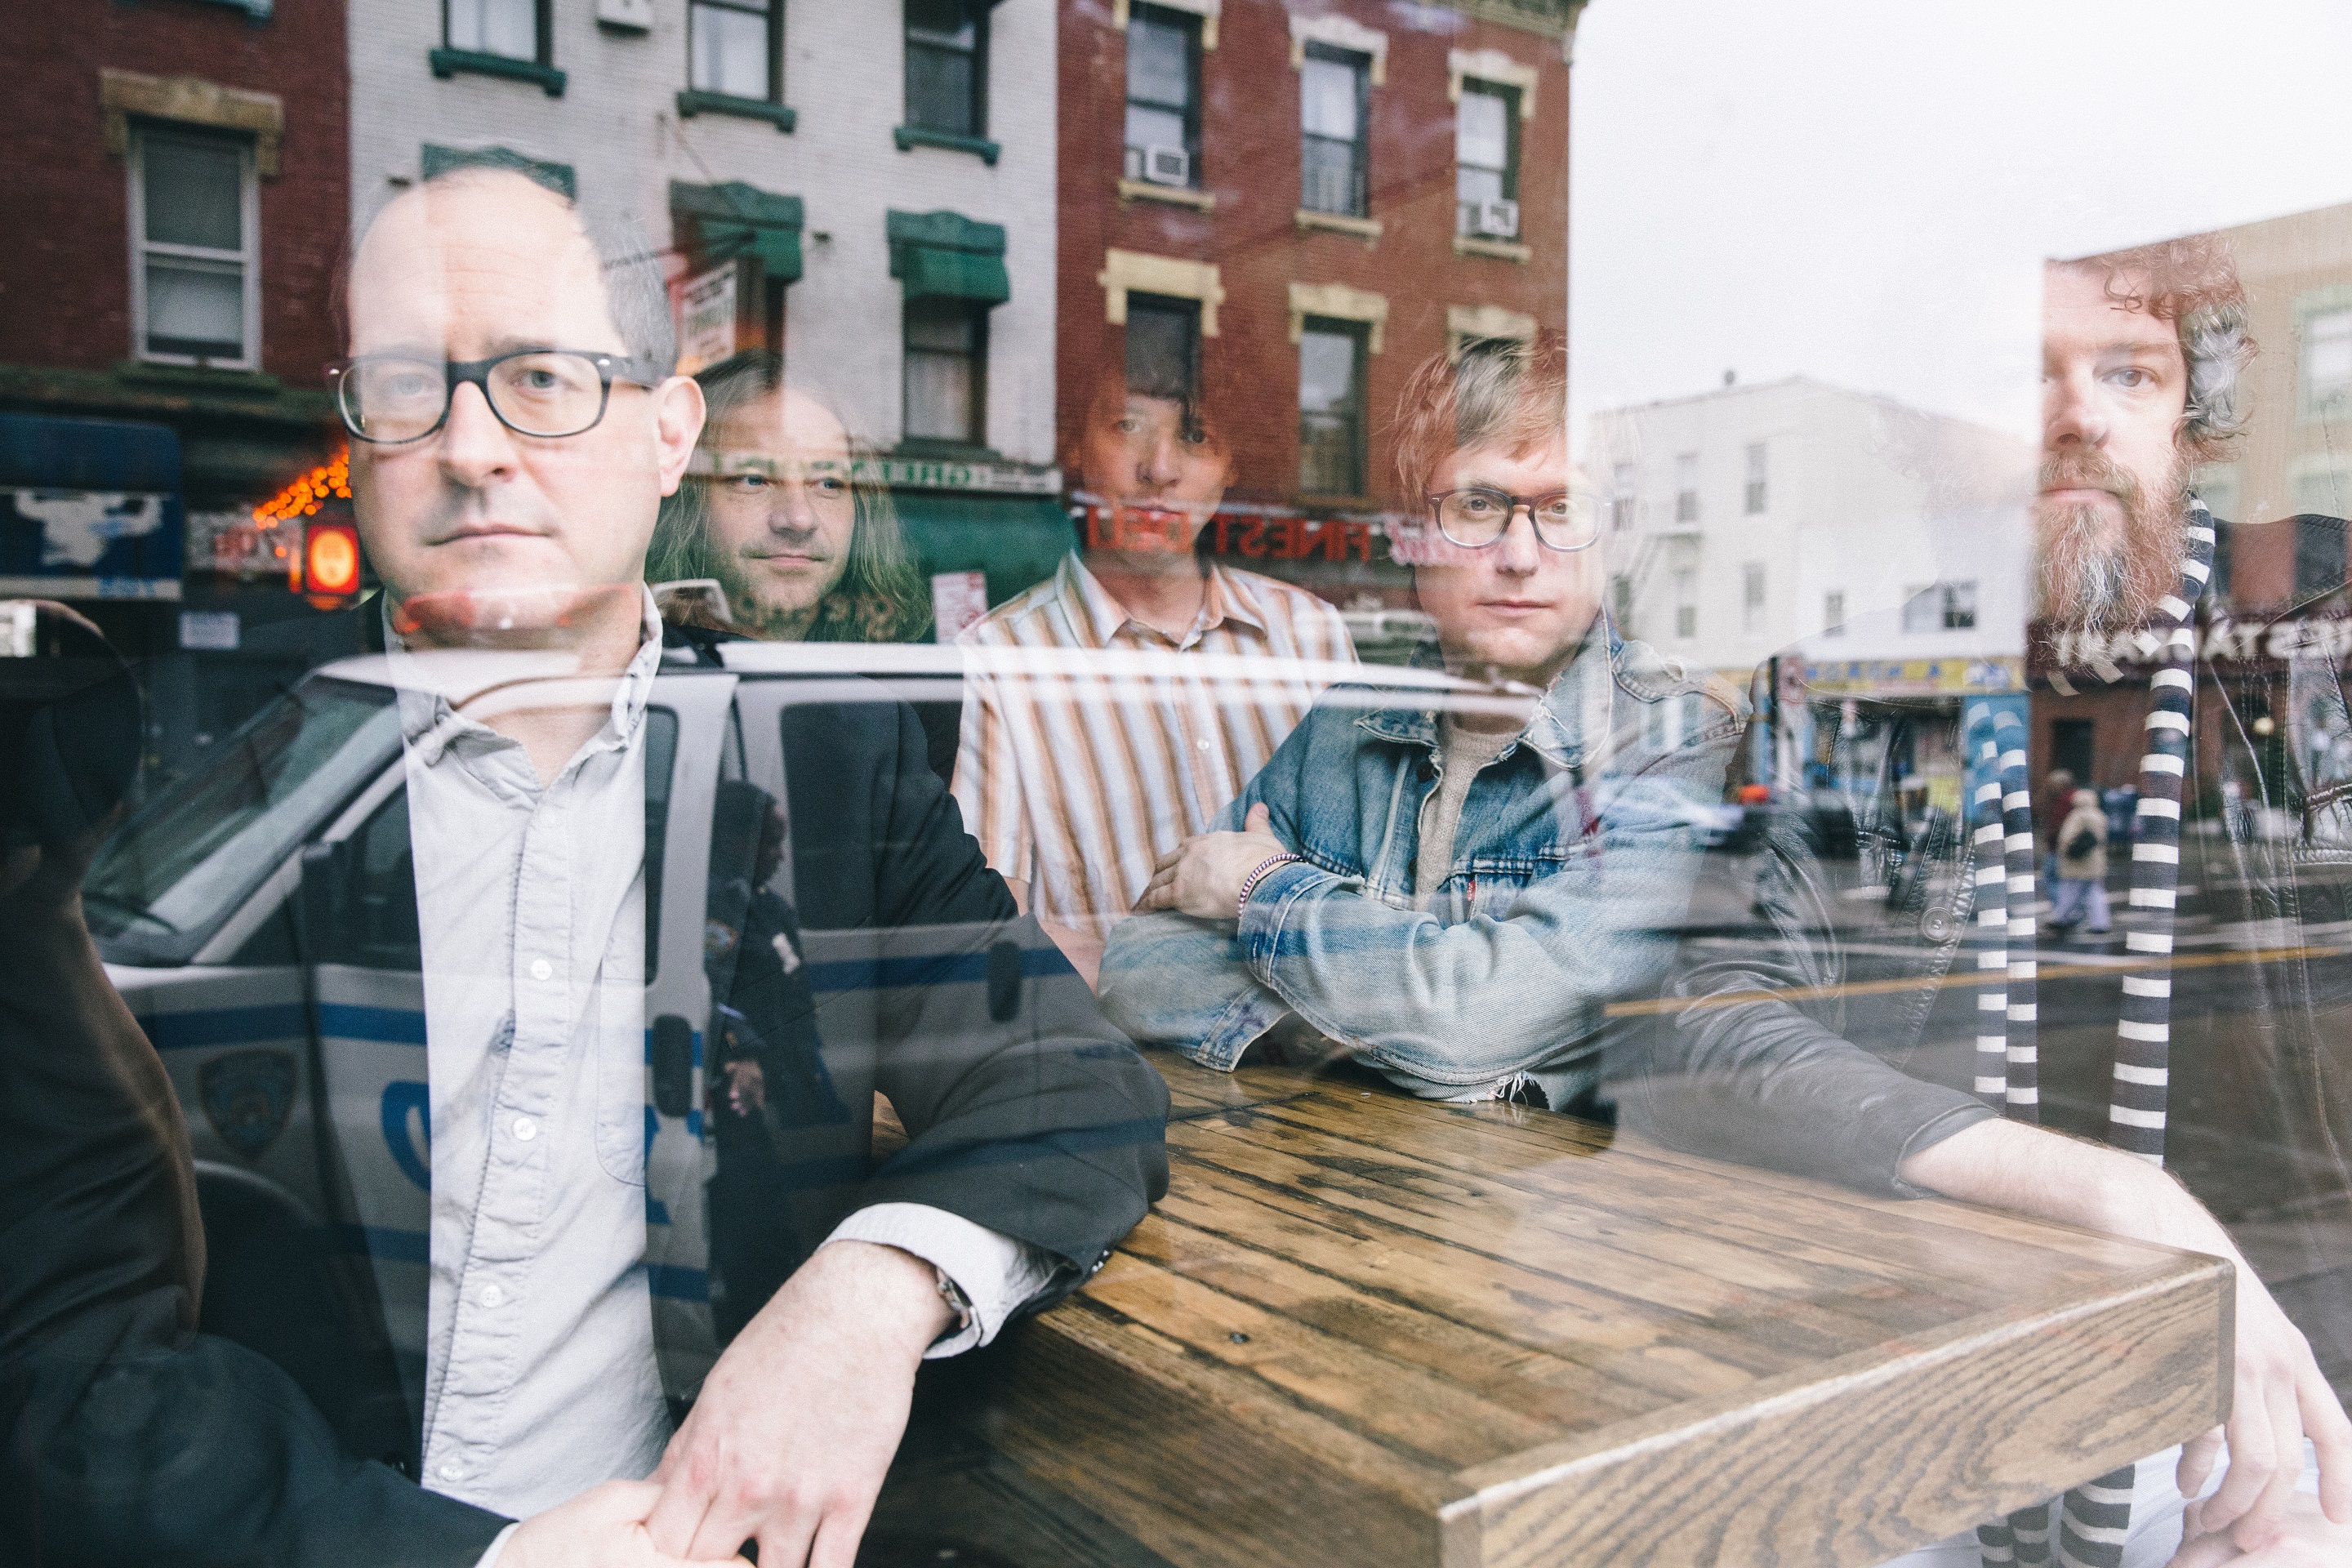 THE HOLD STEADY’S ‘MASSIVE NIGHT’ IN ITHACA